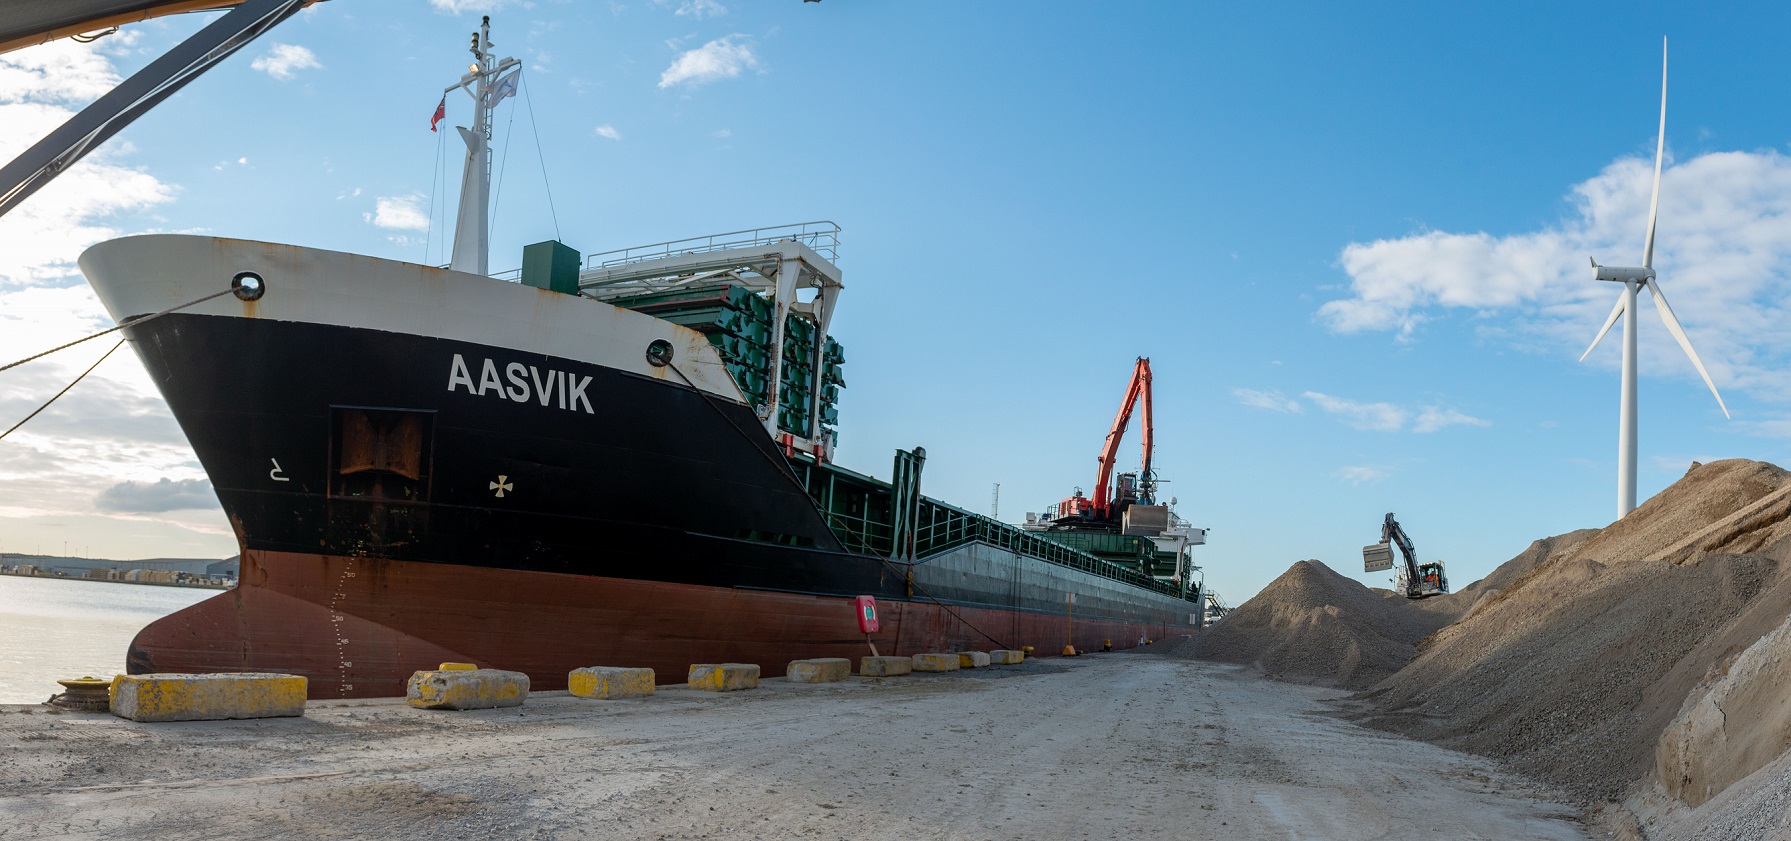 The secondary aggregates were shipped from Cornwall to the GRS marine wharf and processing plant at Tilbury